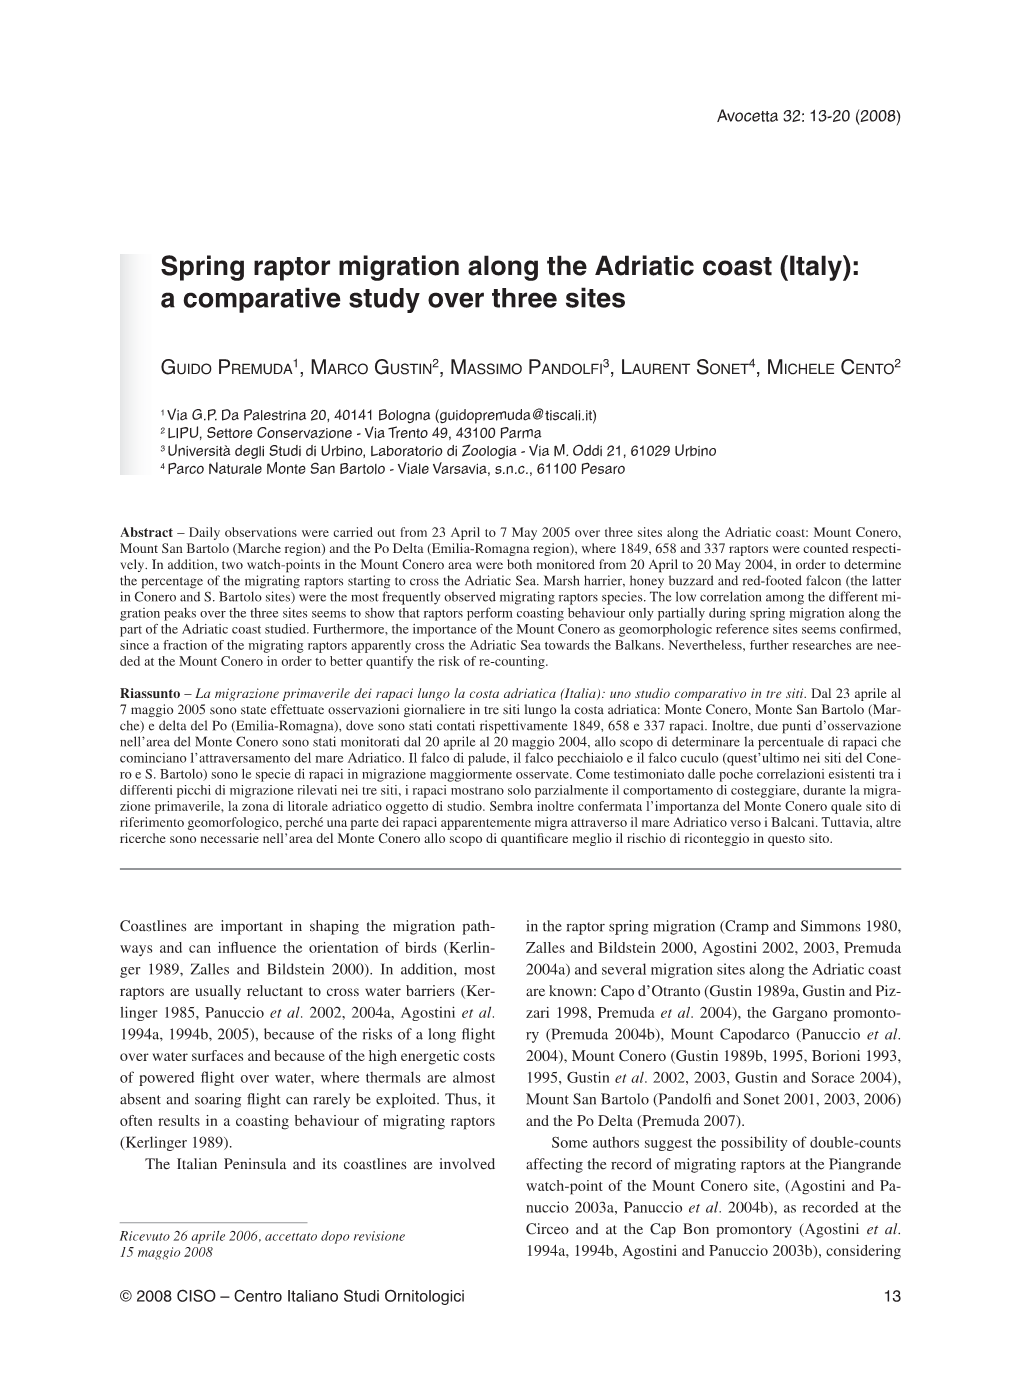 Spring Raptor Migration Along the Adriatic Coast (Italy): a Comparative Study Over Three Sites